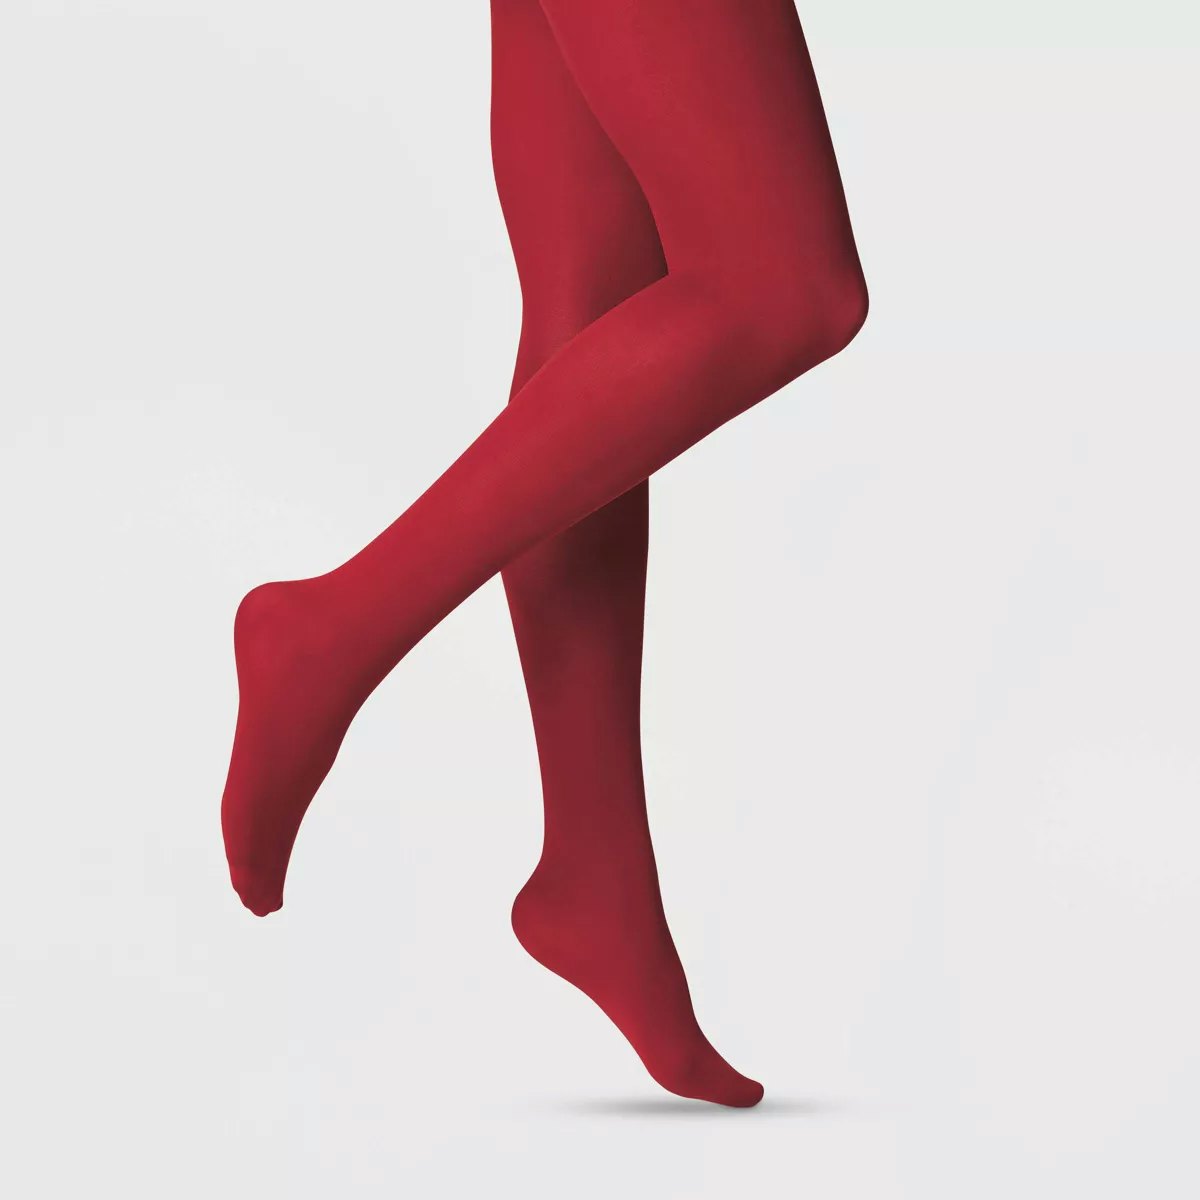 How To Wear Red Tights And Red Socks Now